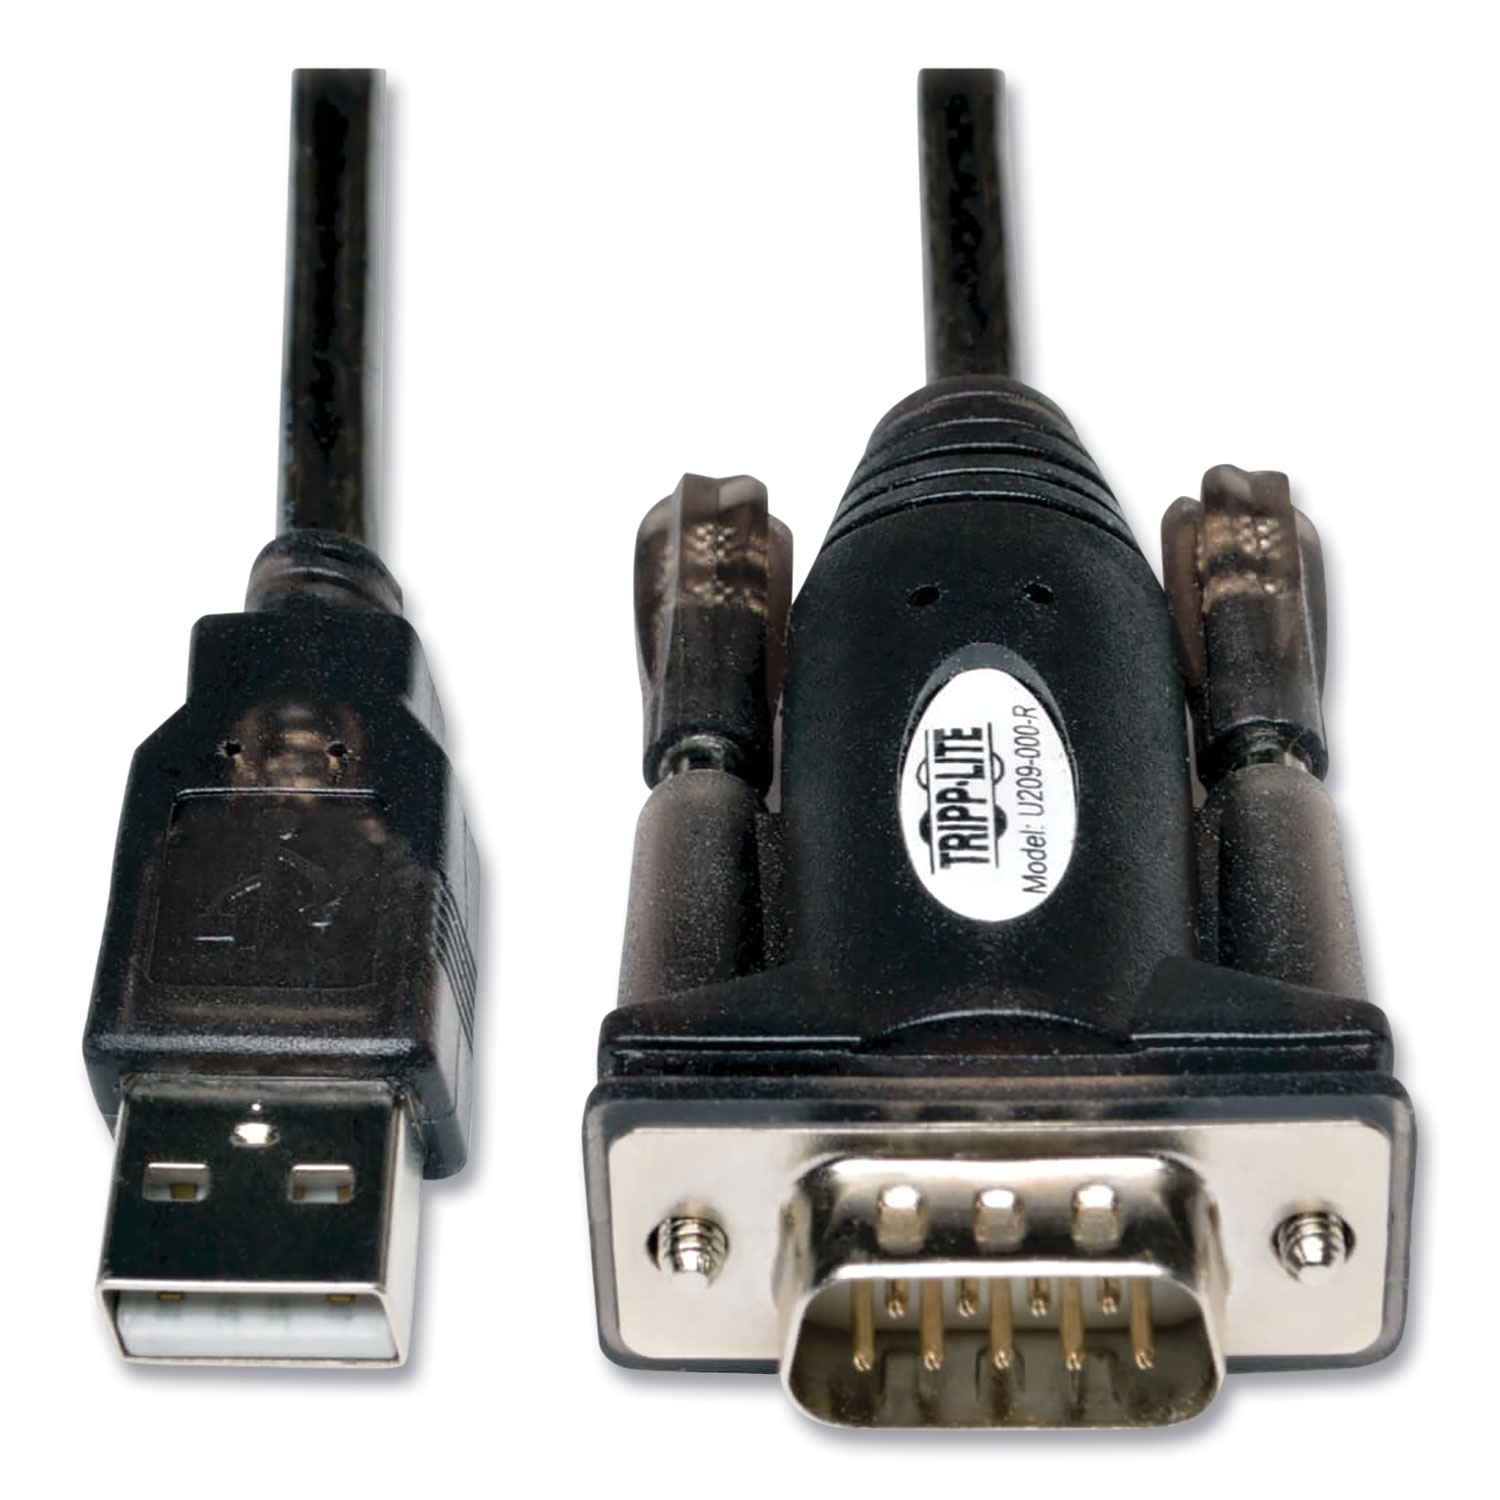 Tripp Lite 15ft USB 2.0 Hi-Speed A/B Device Cable Shielded Male